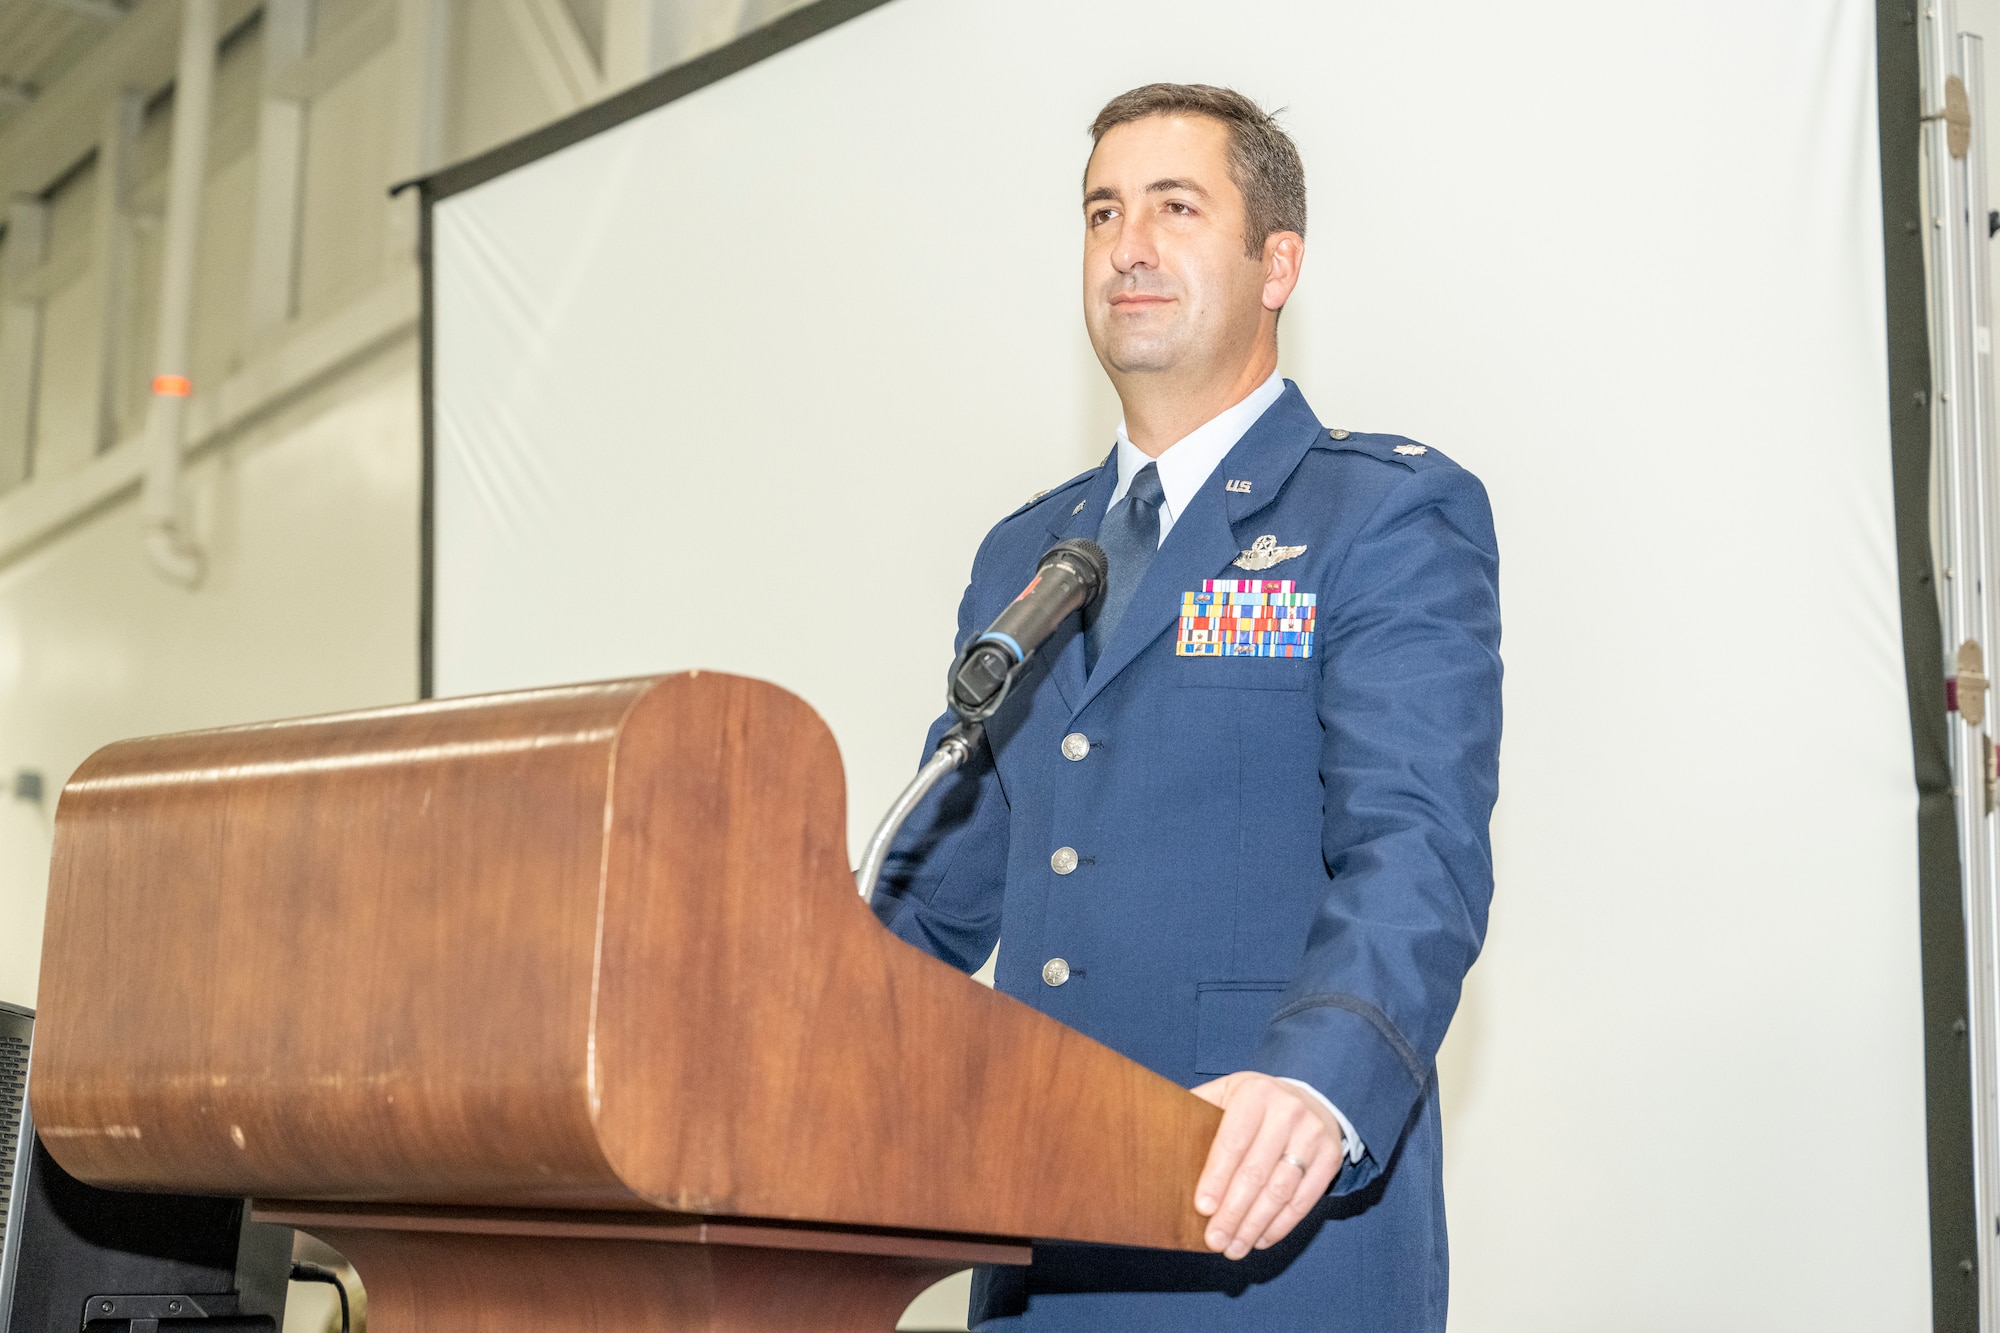 Lt. Col. D. Gifford Bloom, the new 721 Contingency Response Squadron (CRS) Commander, gives his first speech to his squadron and members in attendance for the 721st CRS Assumption of Command ceremony held at Travis Air Force Base, Calif., Jan. 12, 2023.